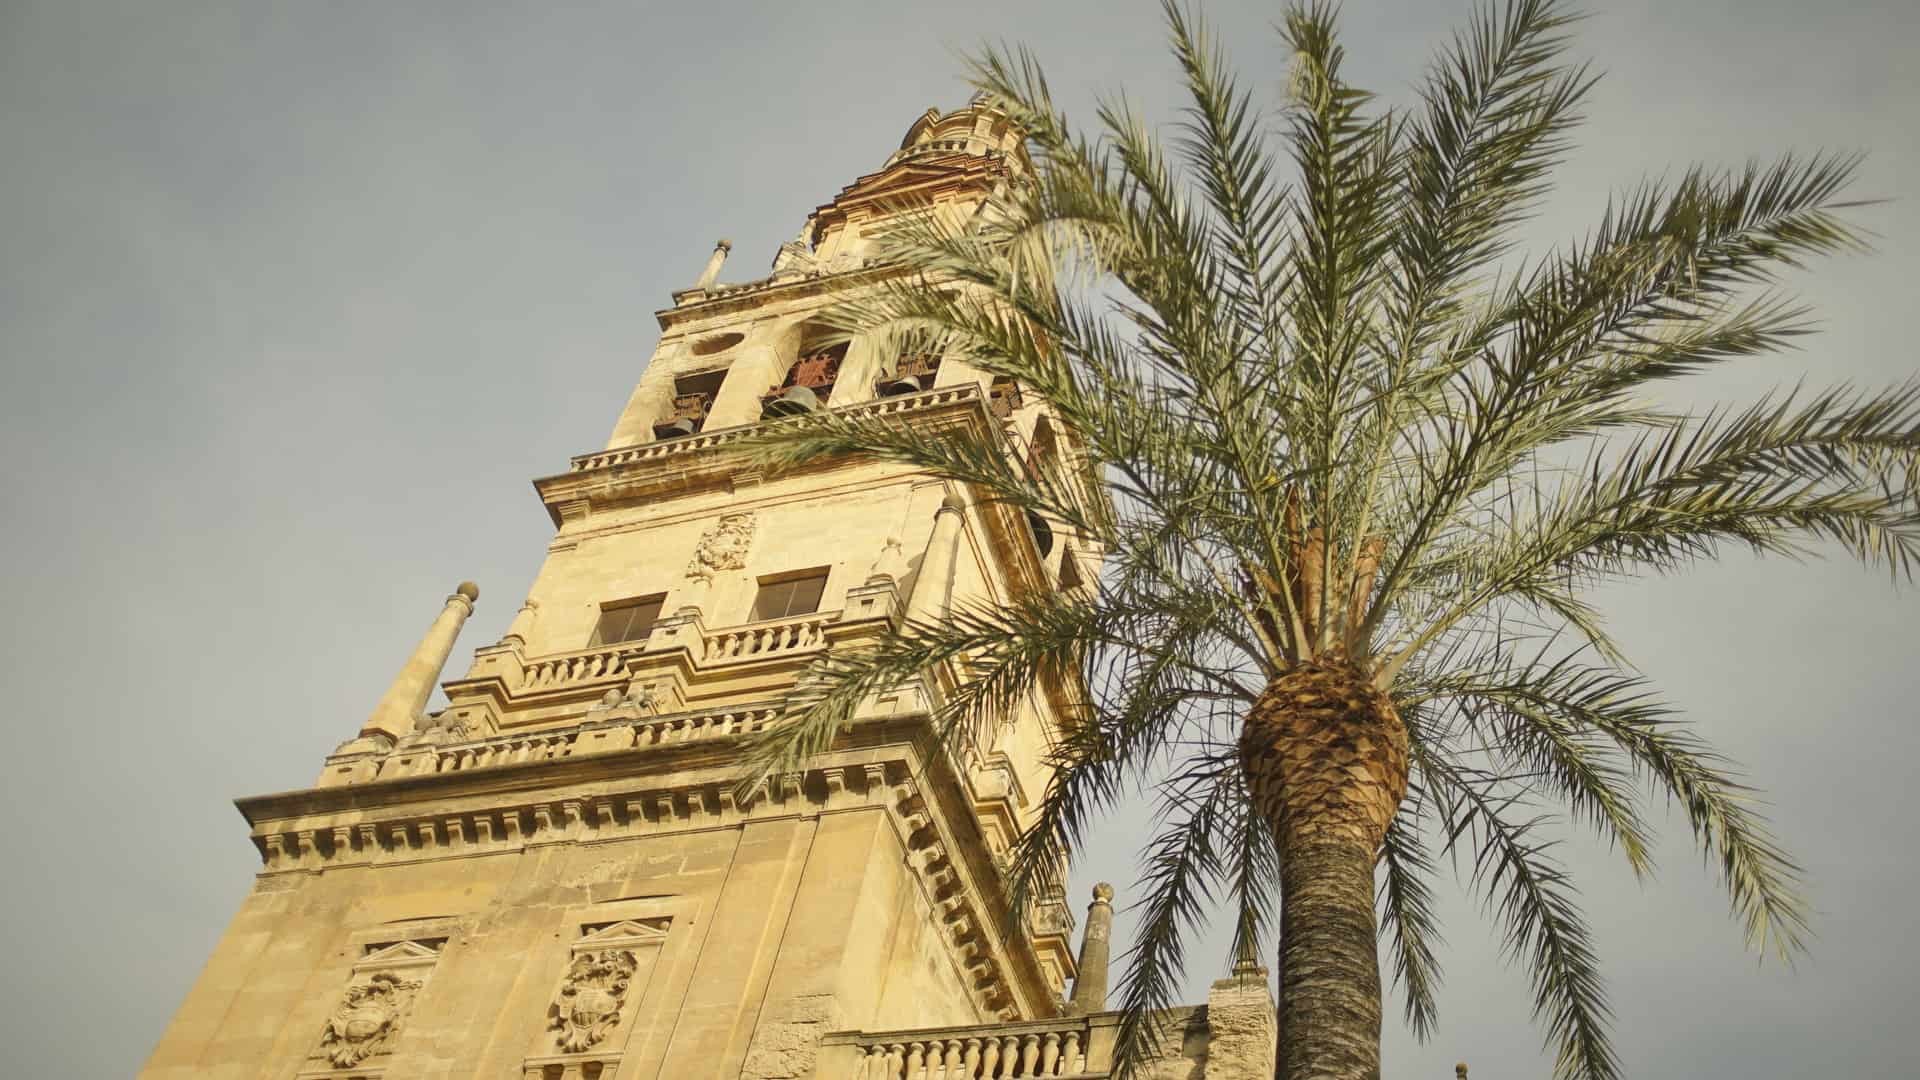 Explore Córdoba's city center and marvel at the Mudéjar arquitecture and it's one of a kind Mosque-Cathedral and Alcazár of the Christian Monarchs.